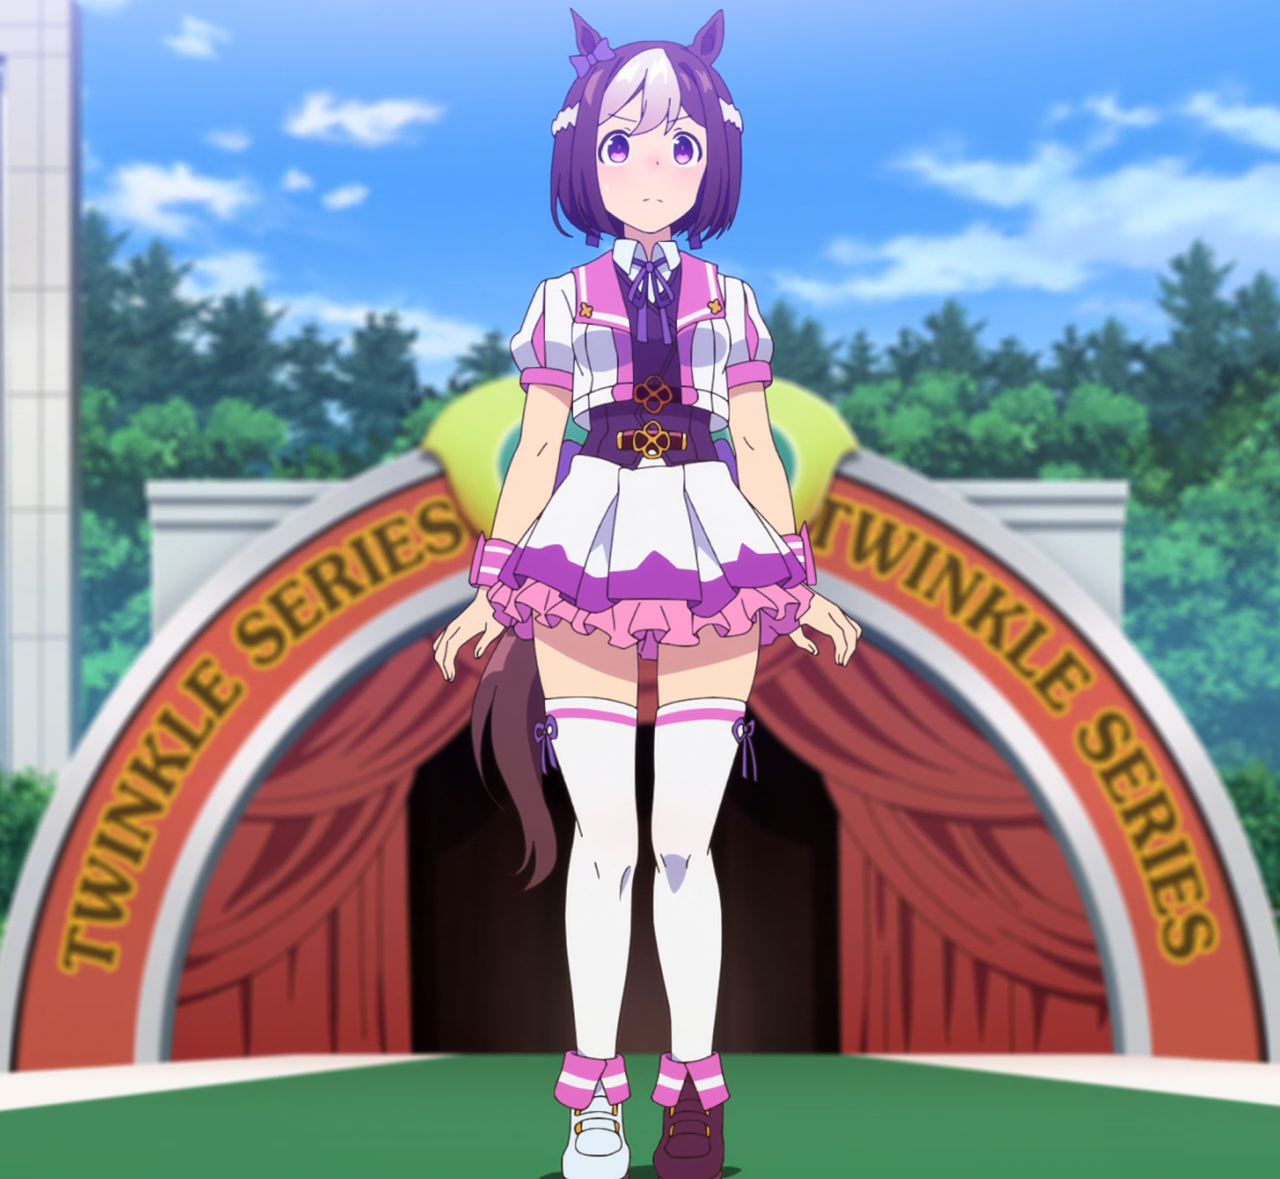 Uma Musume Pretty Derby Wallpapers High Quality | Download ...